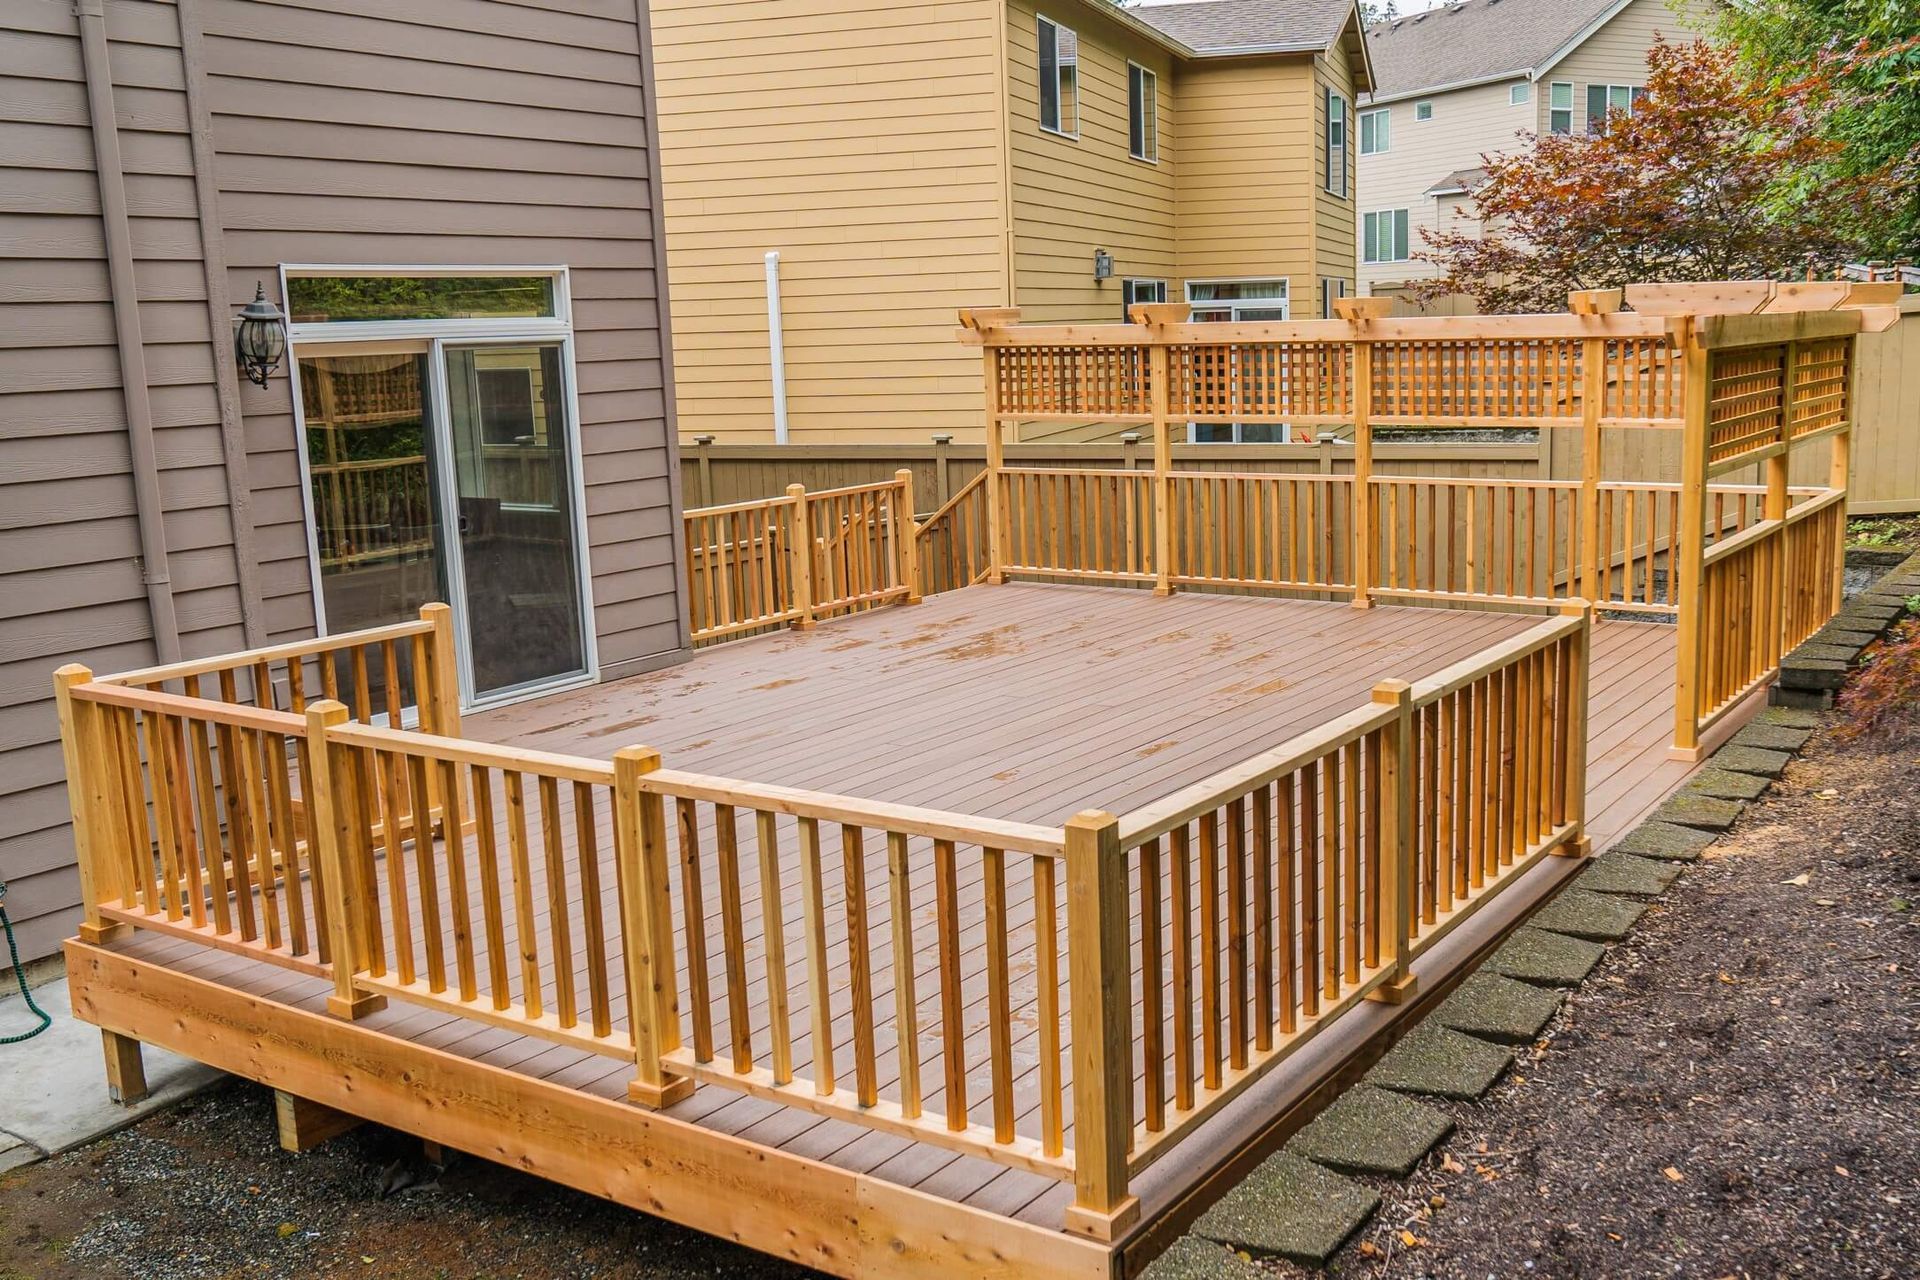 An illuminated deck at night, softly glowing with warm, inviting light, casting a gentle and serene ambiance.